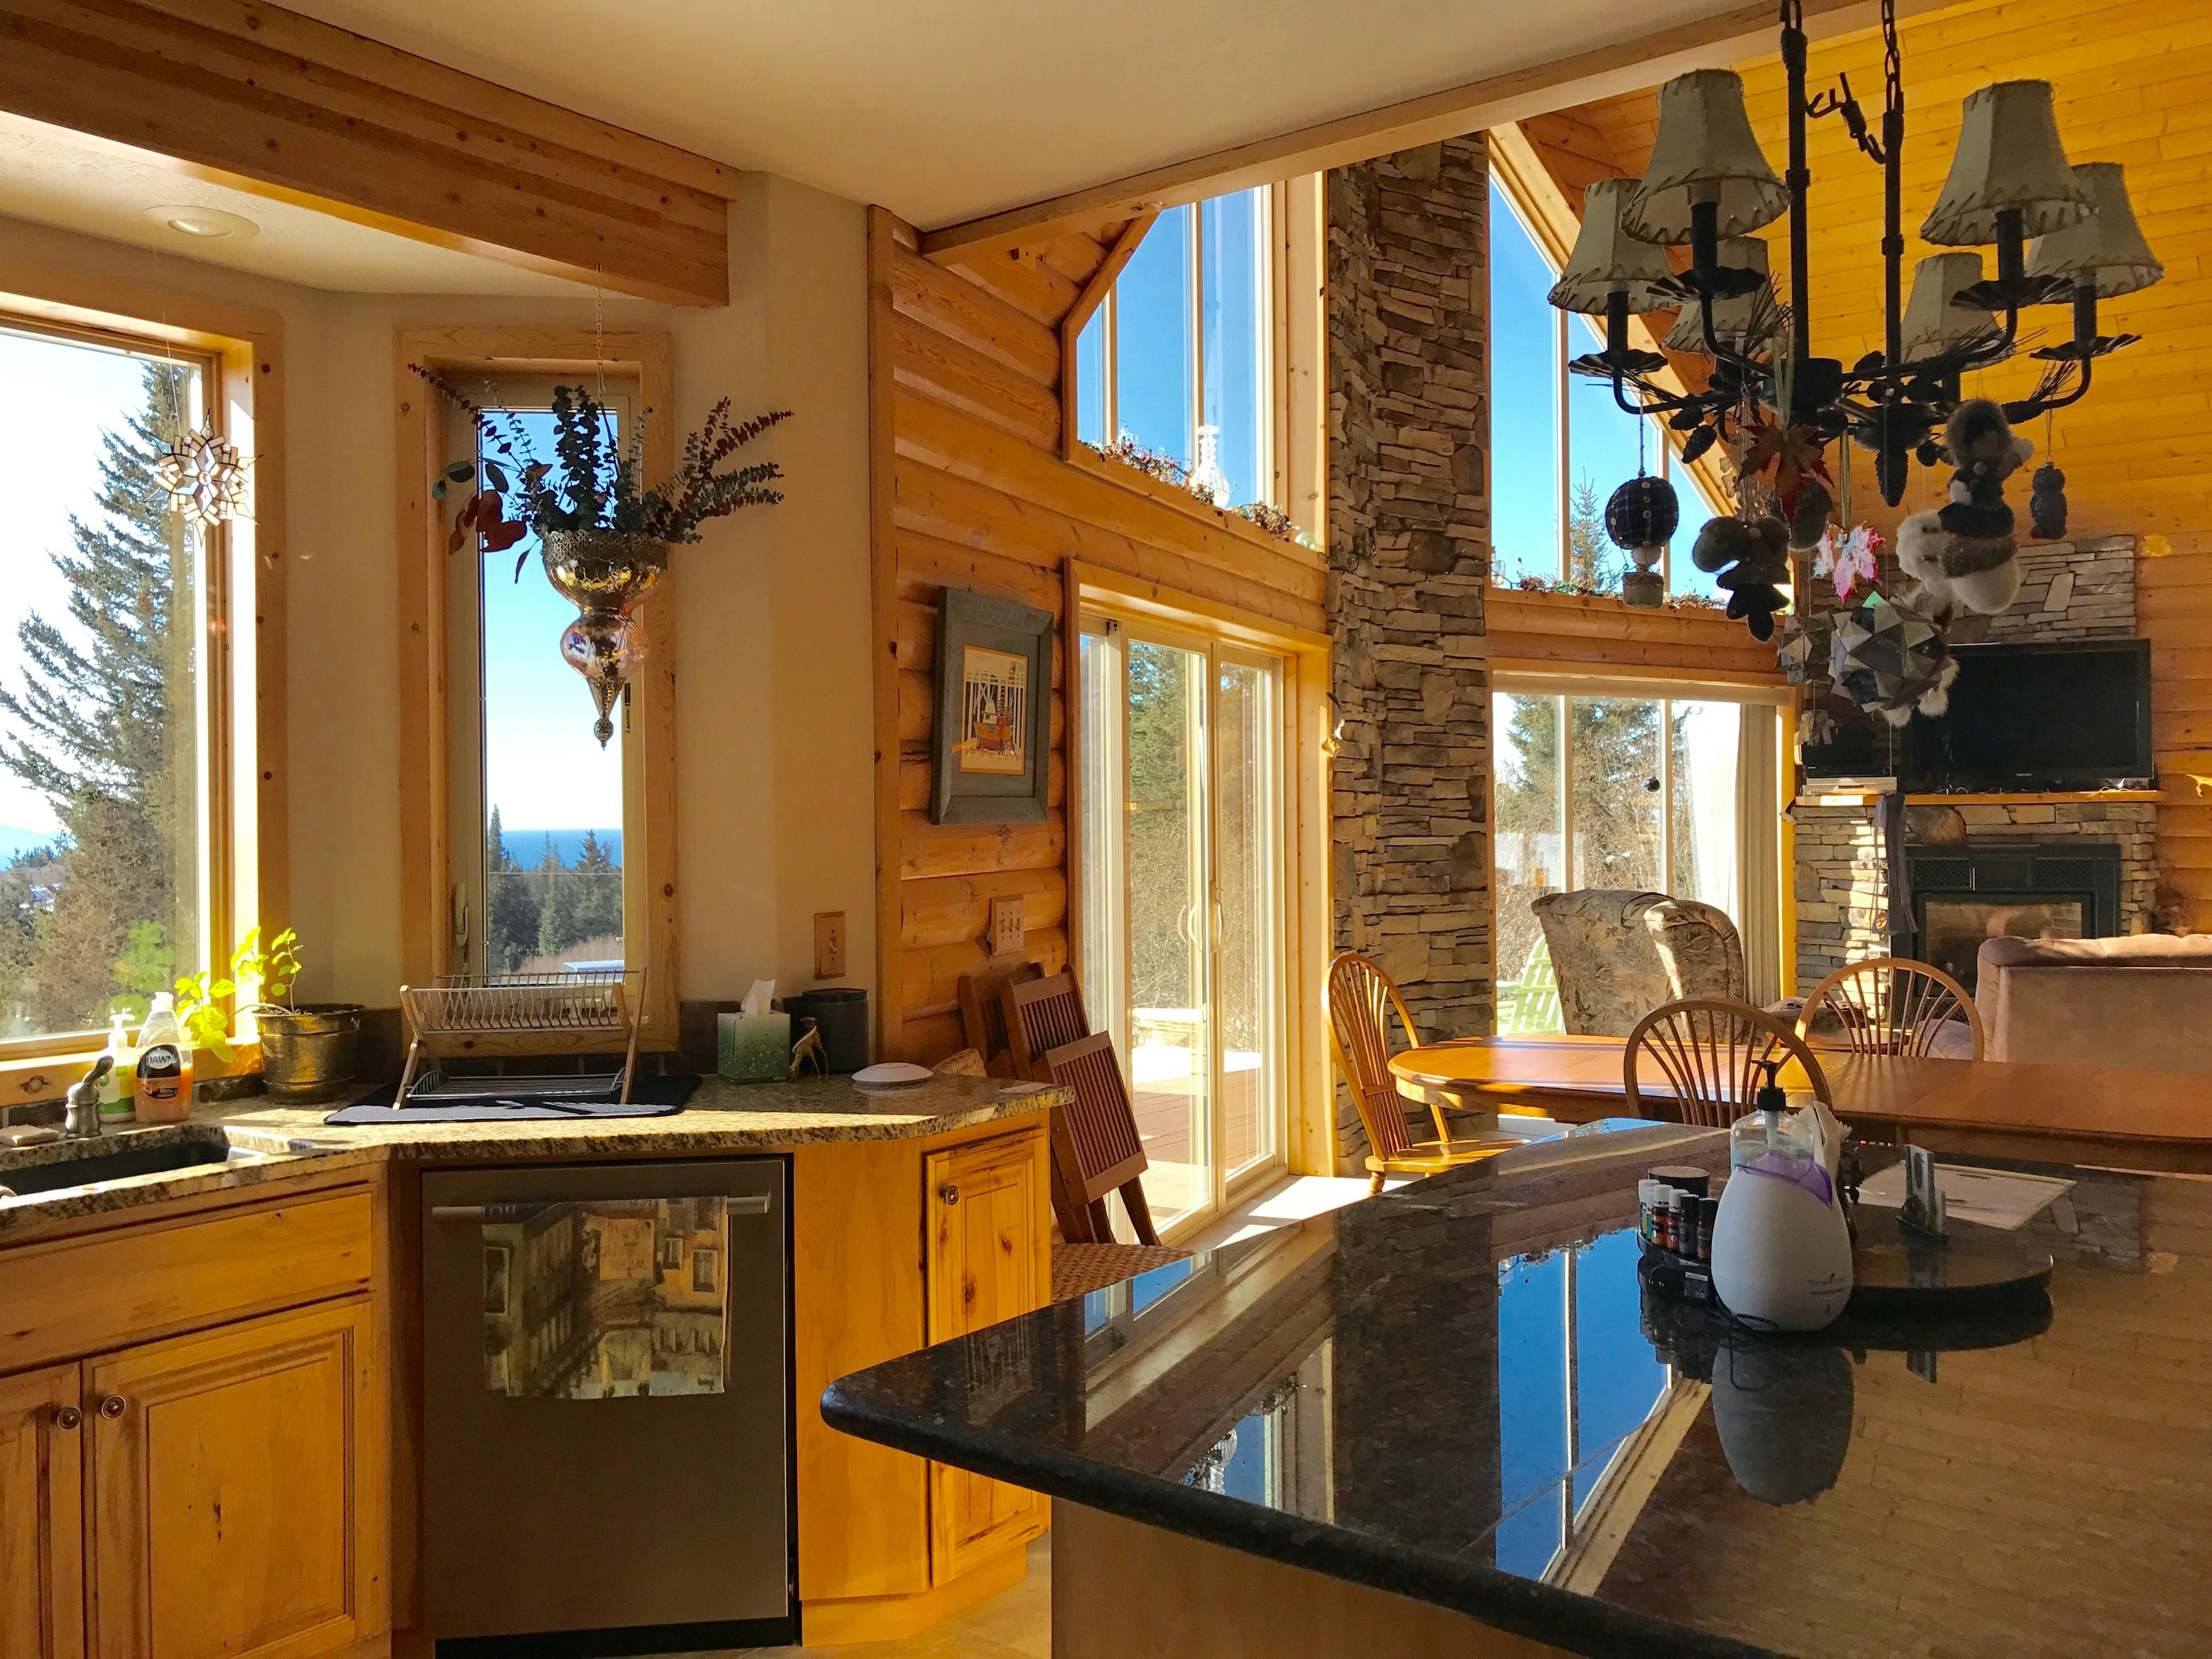 View of the great room from the kitchen, counter with sink to left, kitchen island to right with two-story windows, fireplace, and sitting area in background